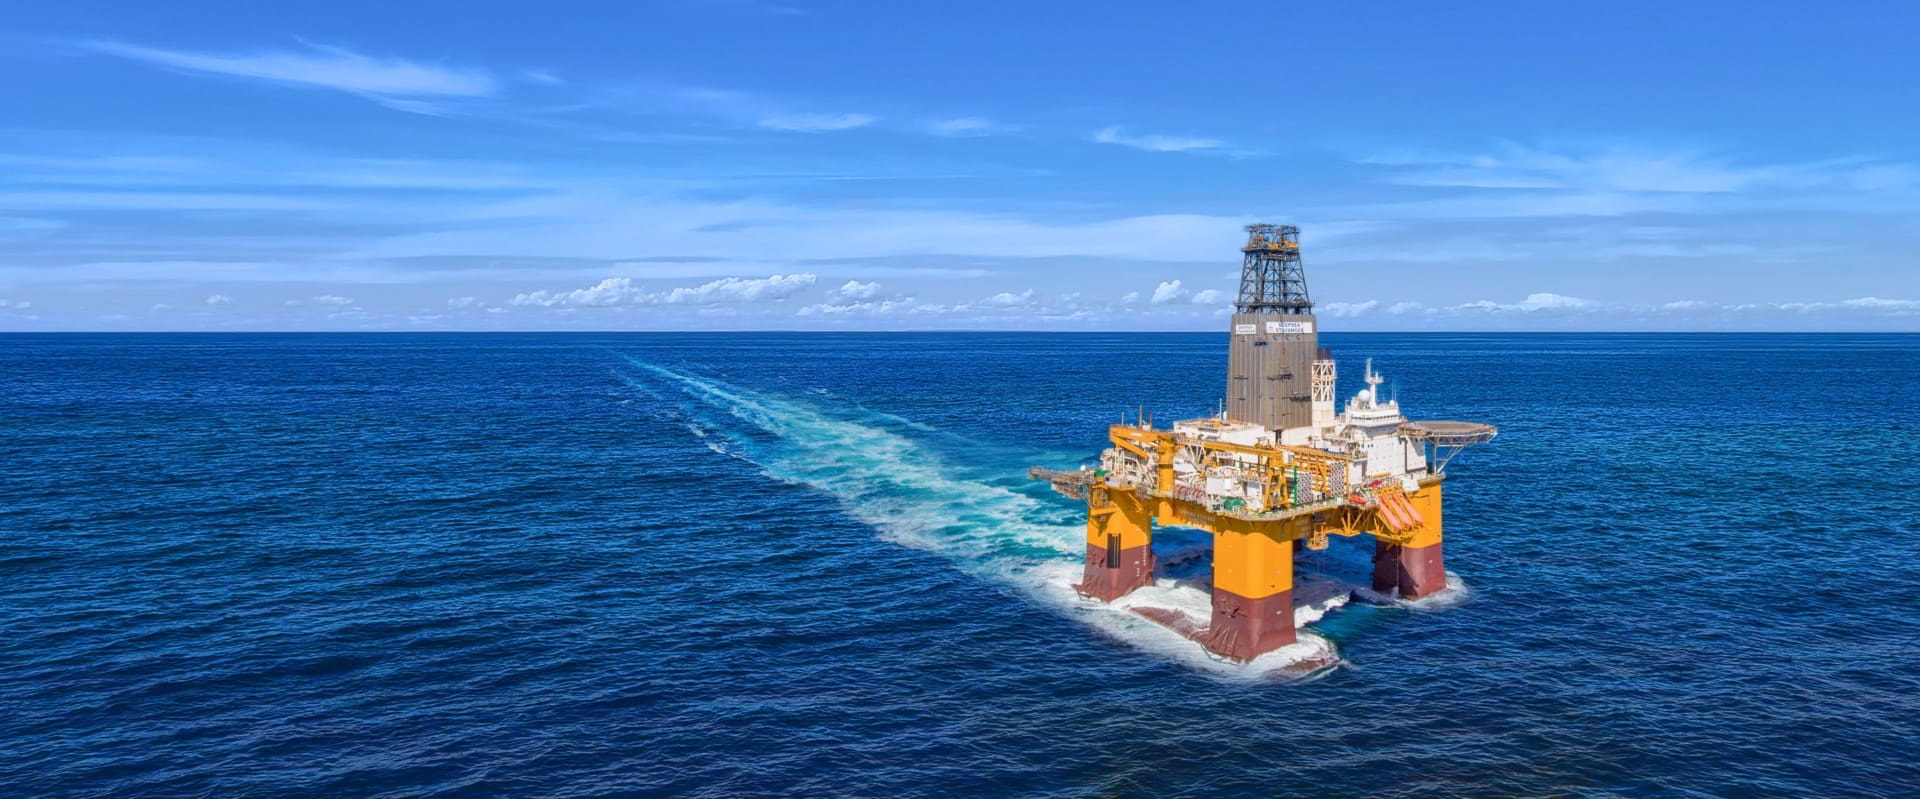 New five-year deal for Odfjell rig with Aker BP